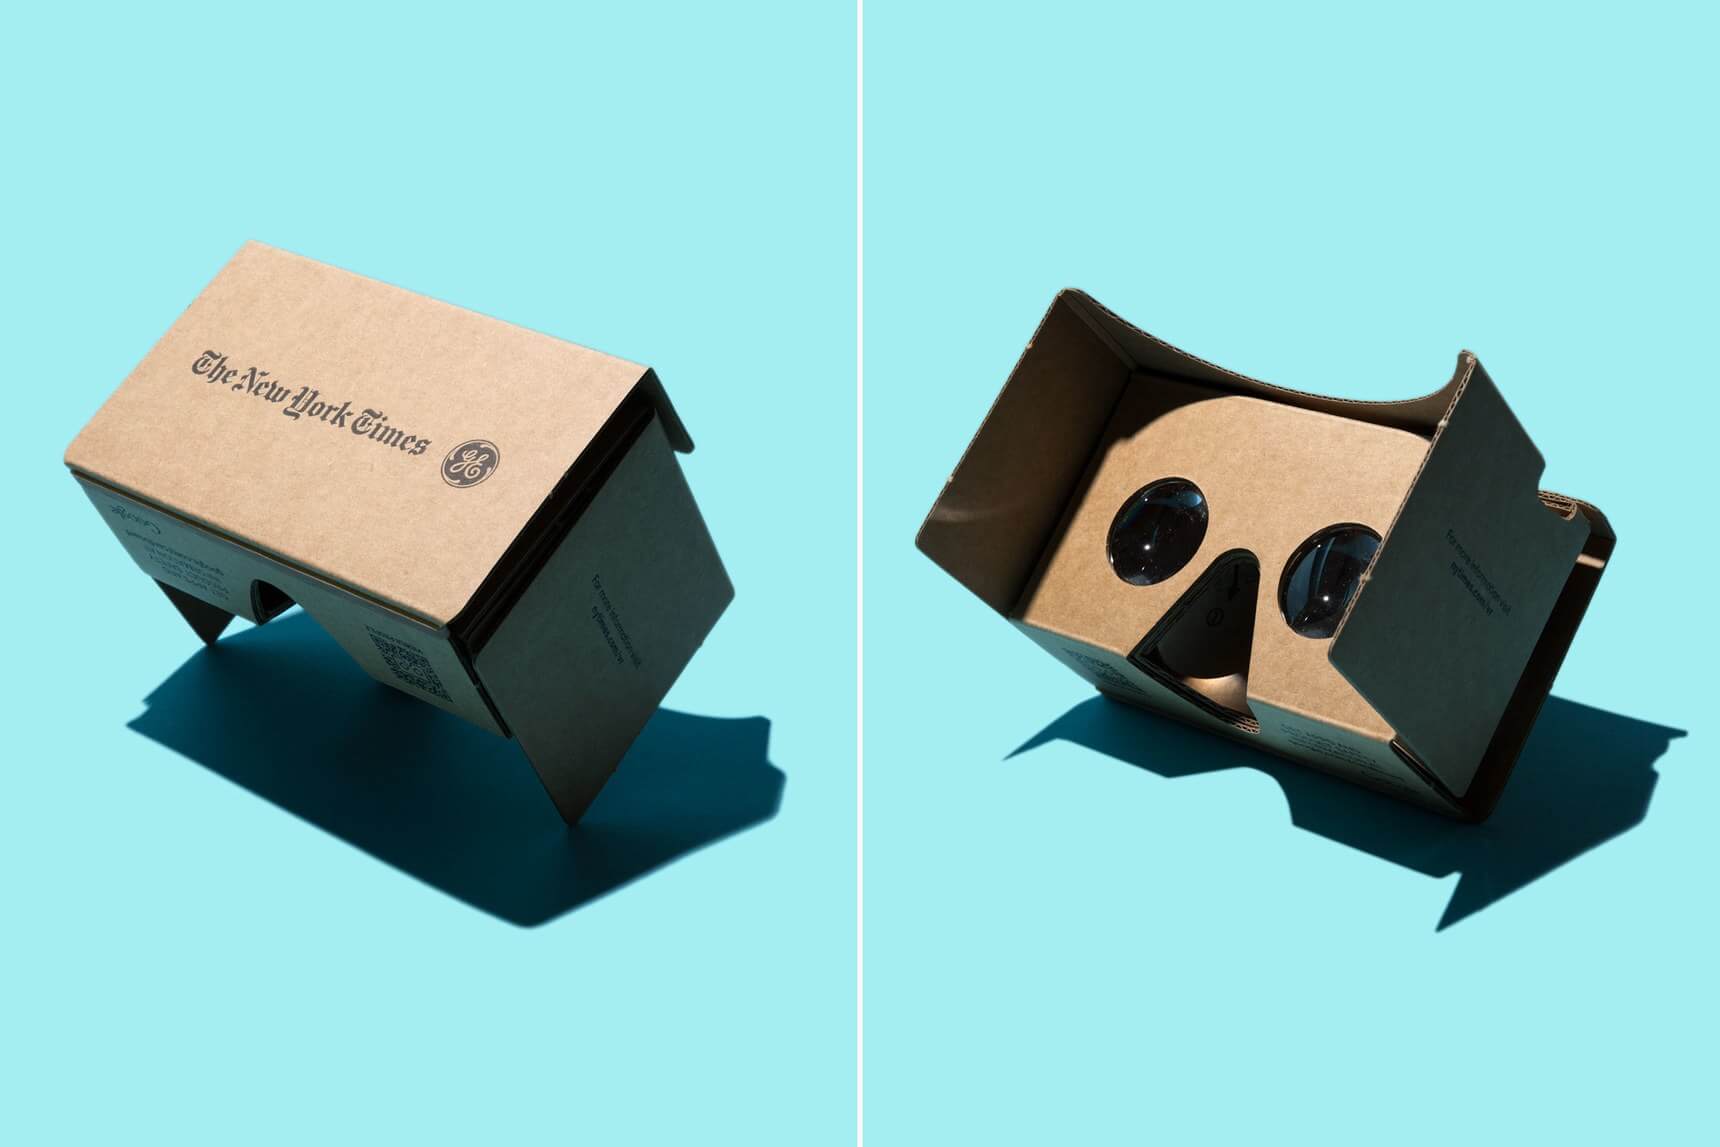 New York Times/GE Cardboard virtual reality viewer collaboration via WIRED